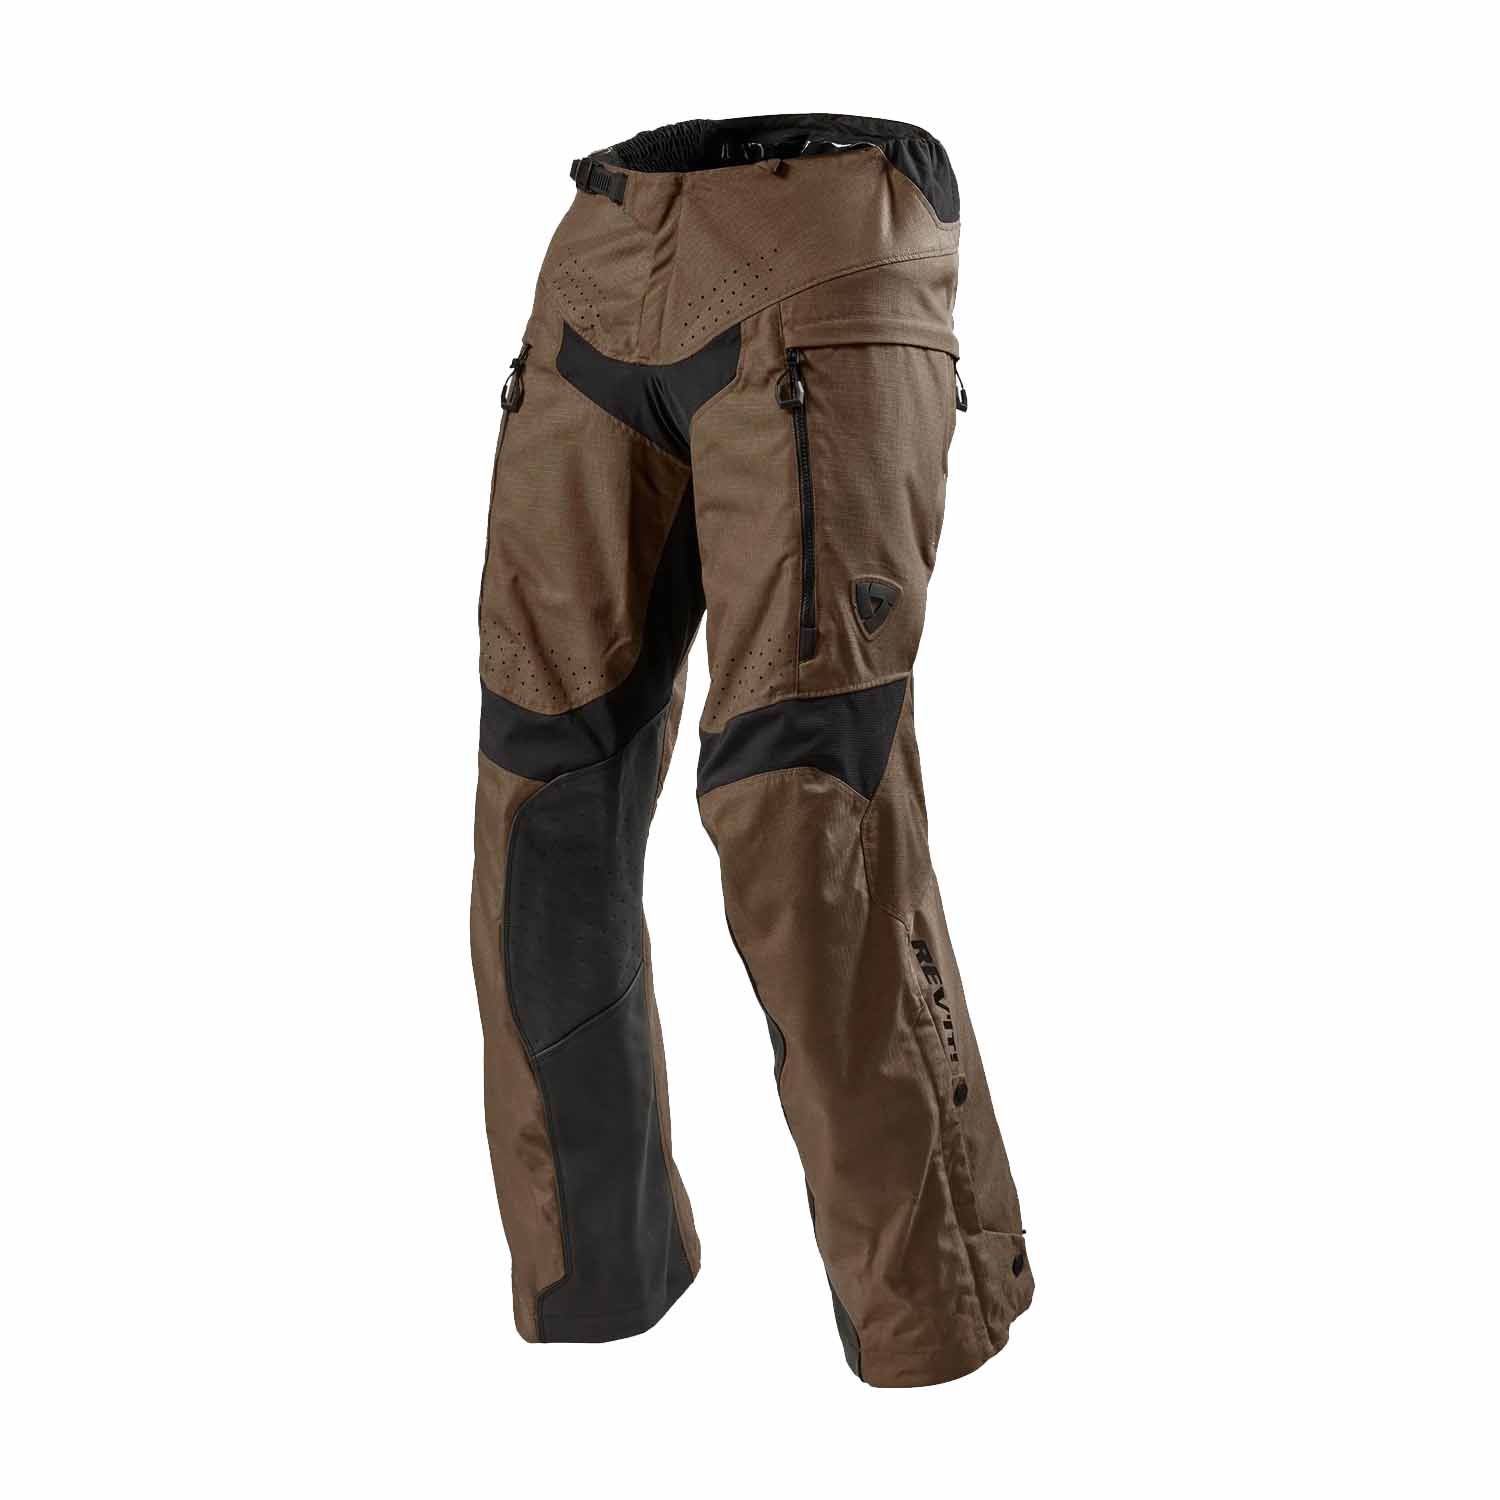 Image of REV'IT! Continent Pants Brown Standard Motorcycle Pants Talla XL